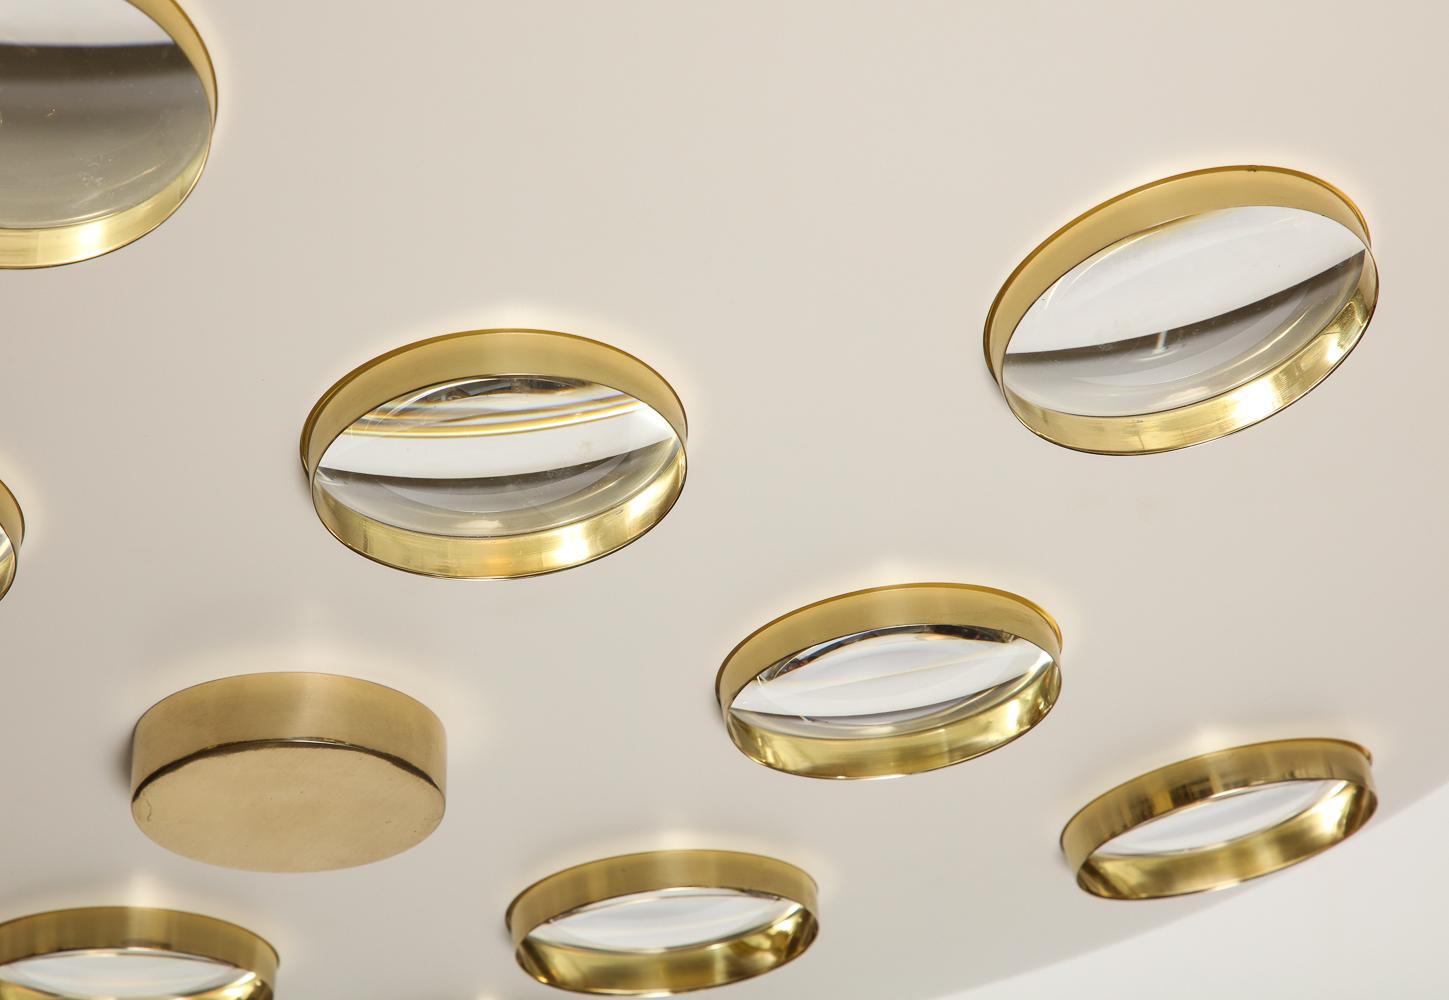 Beautiful cream-painted aluminum saucer form, with circular cut-outs. Each cut-out is fitted with a brass framed glass lens, creating a subtle abstract effect. 6 standard E26 Edison sockets and polished brass mounts. The rod can be cut down and this